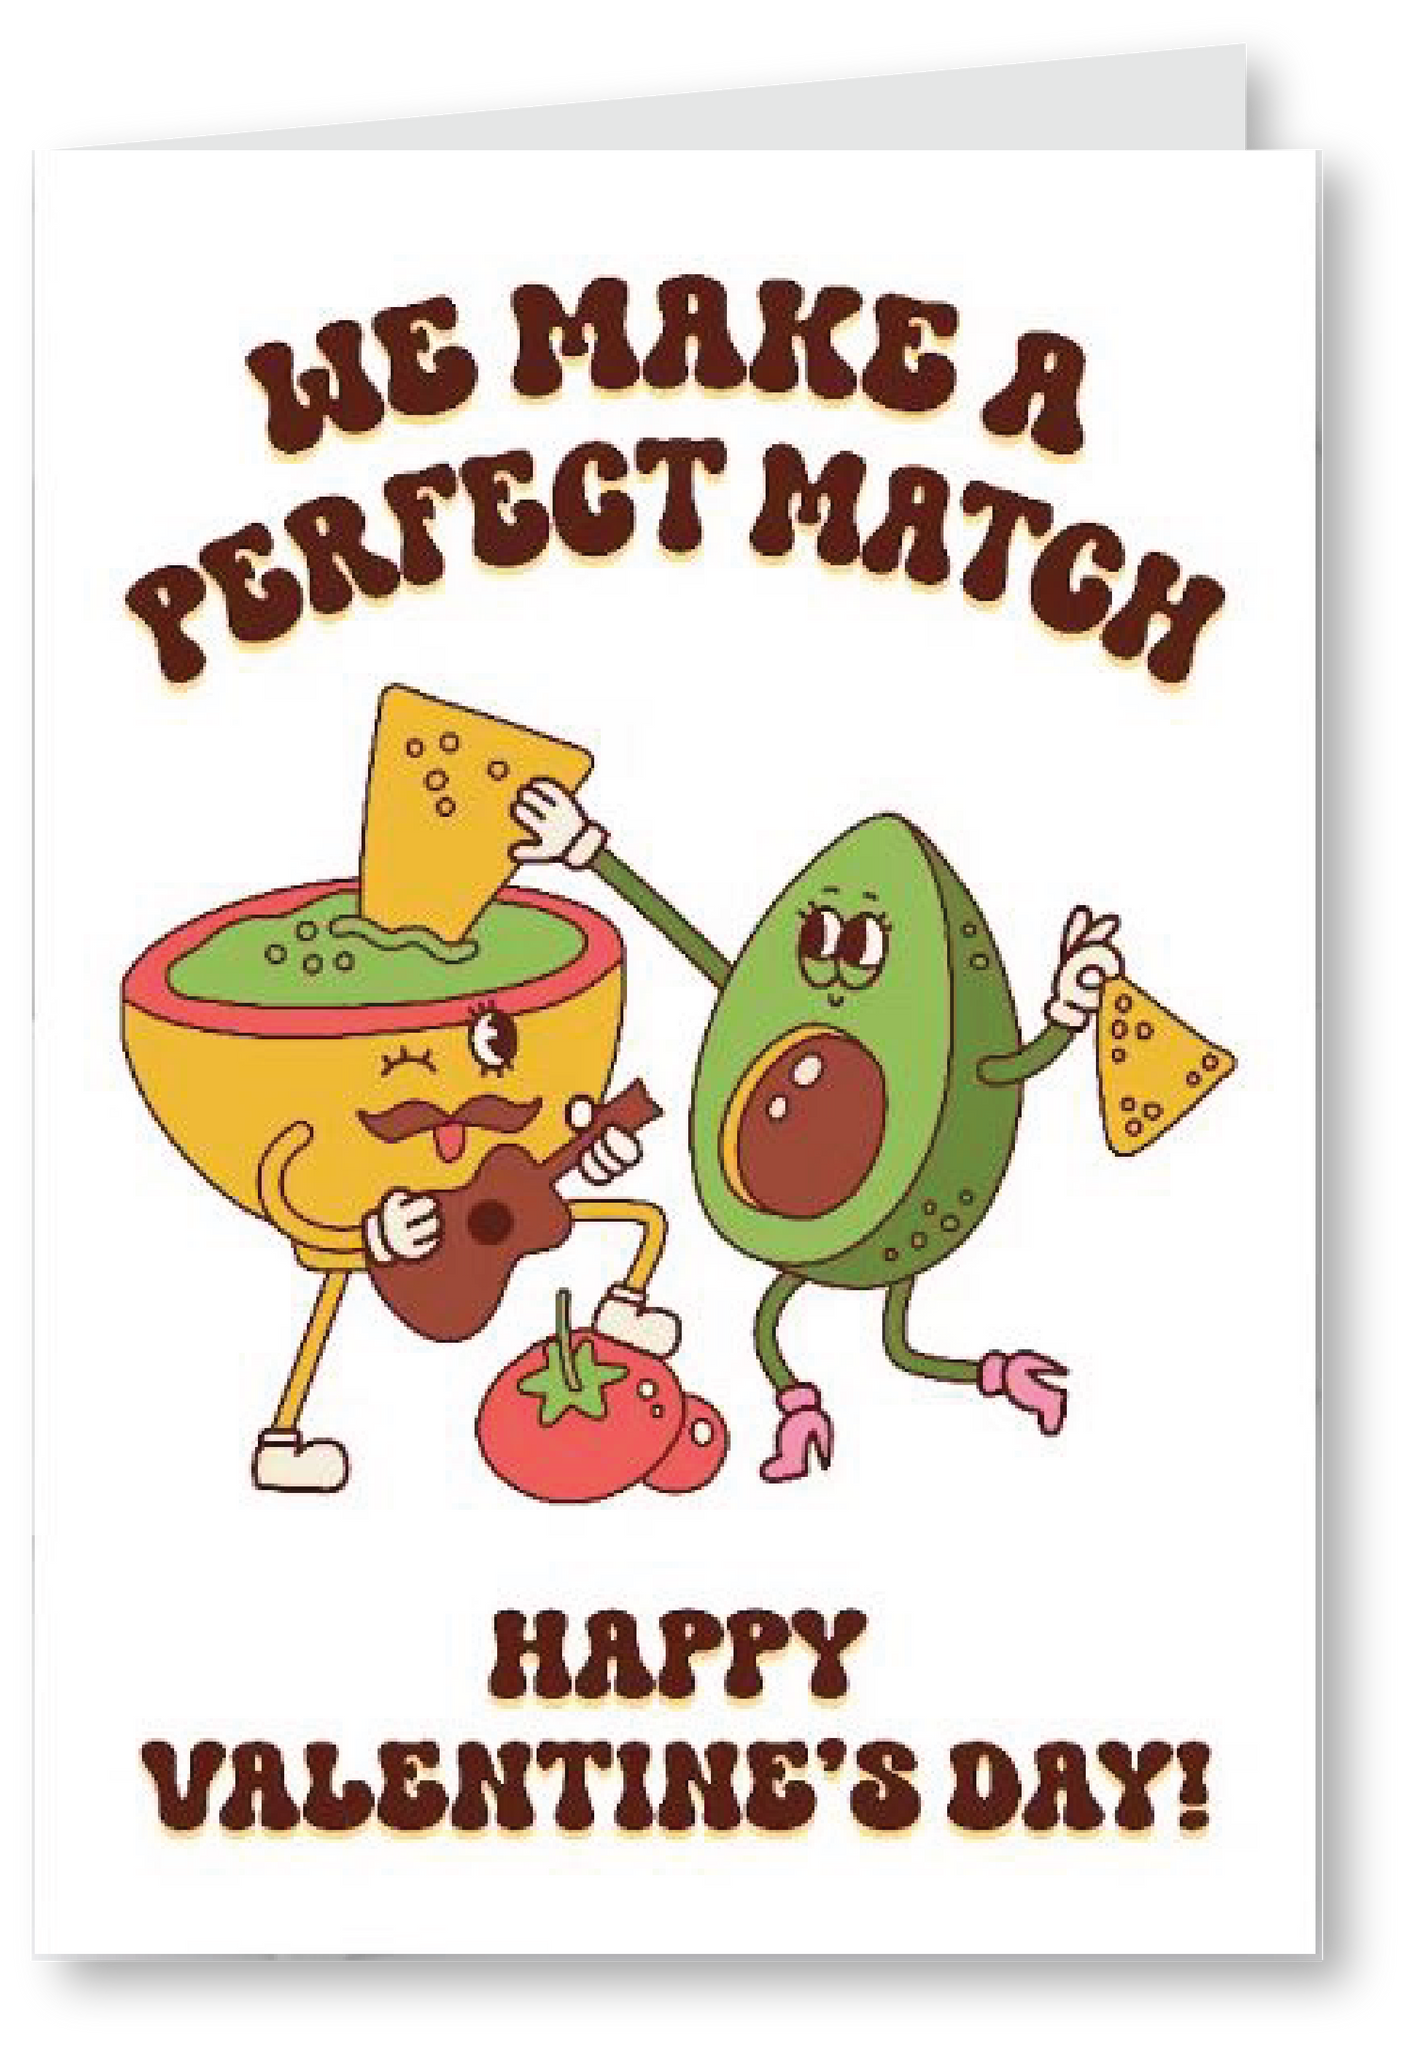 Perfect match - valentine's day card